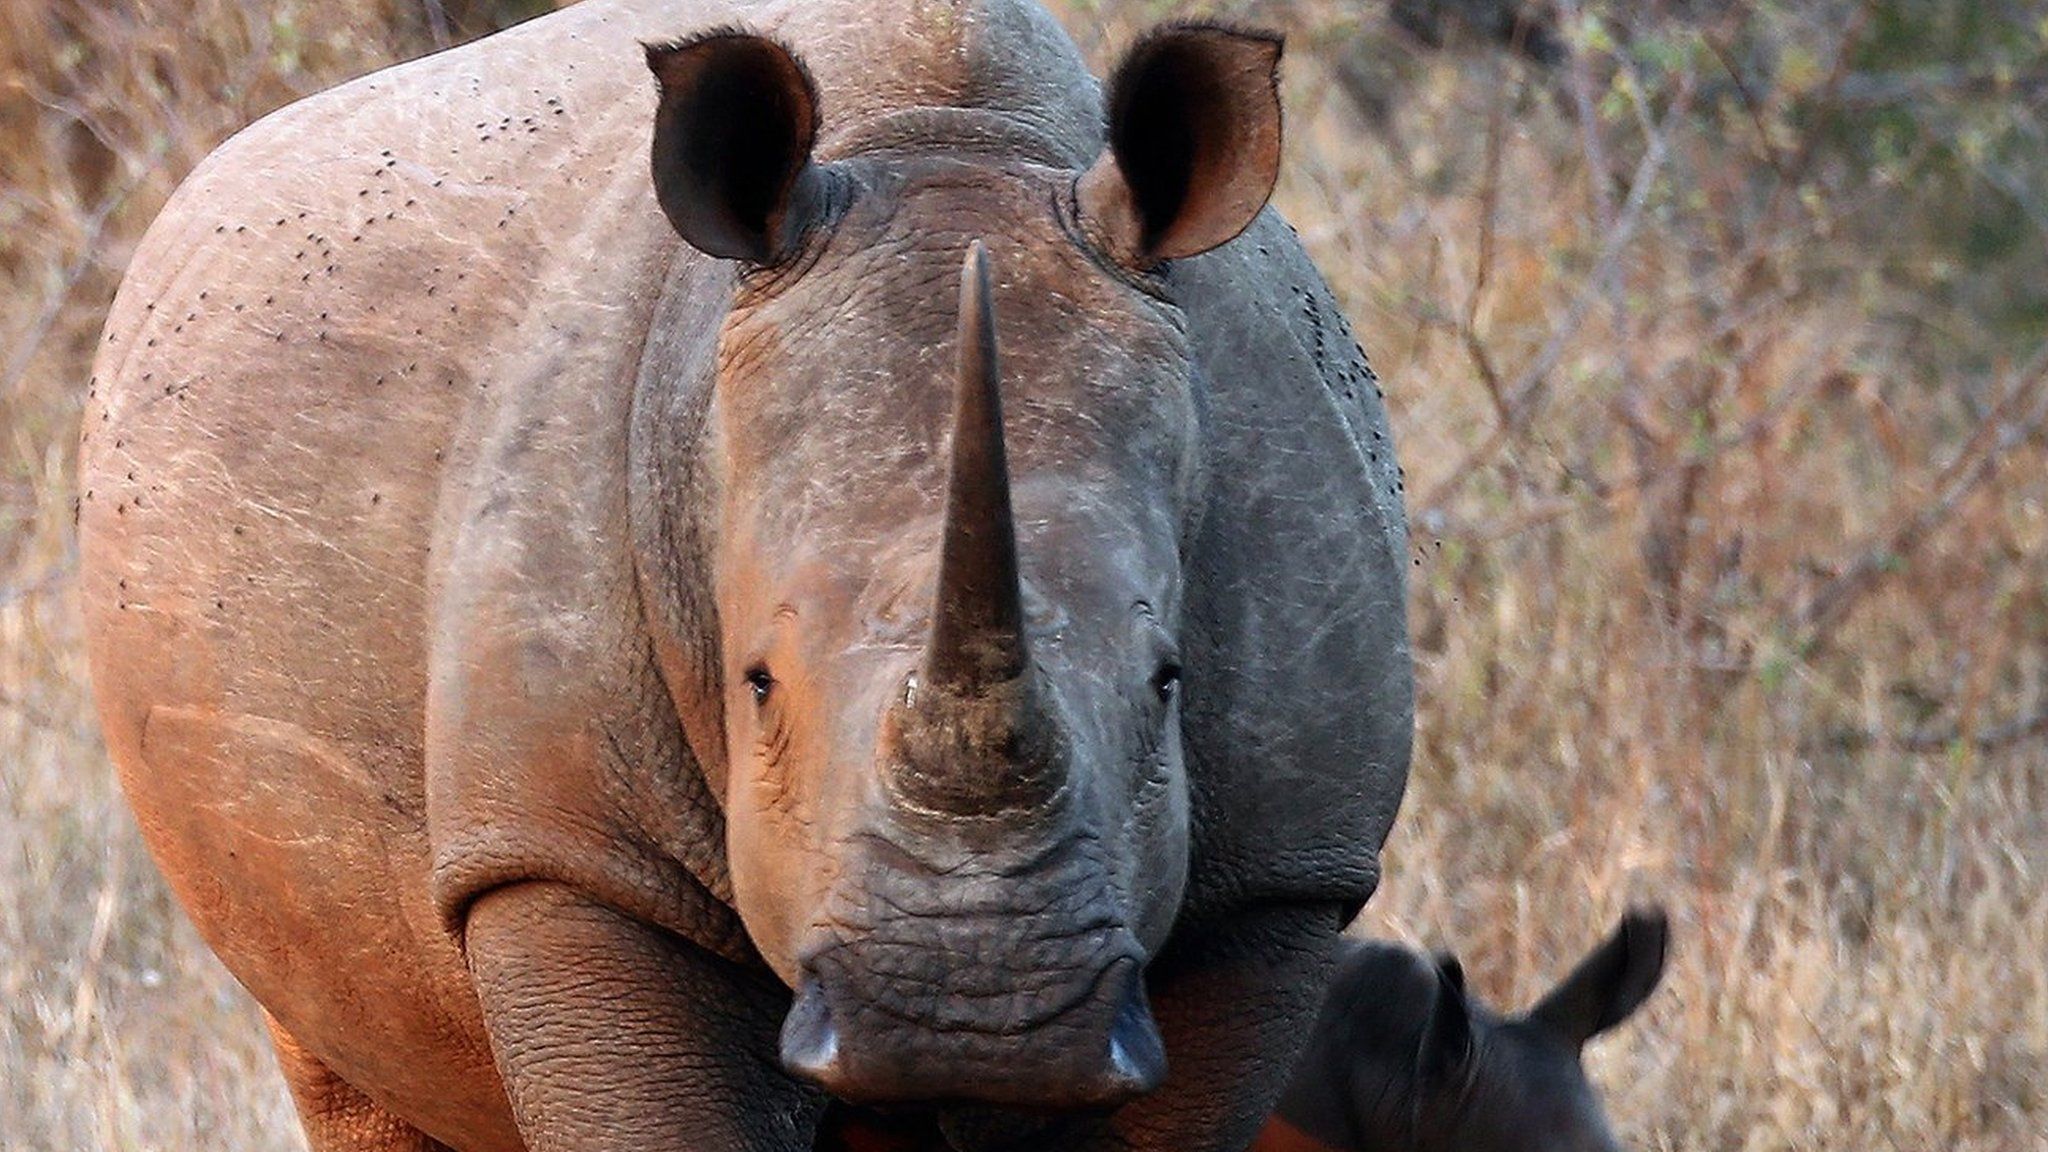 File image of White Rhinoceros in the Kruger National Park, South Africa